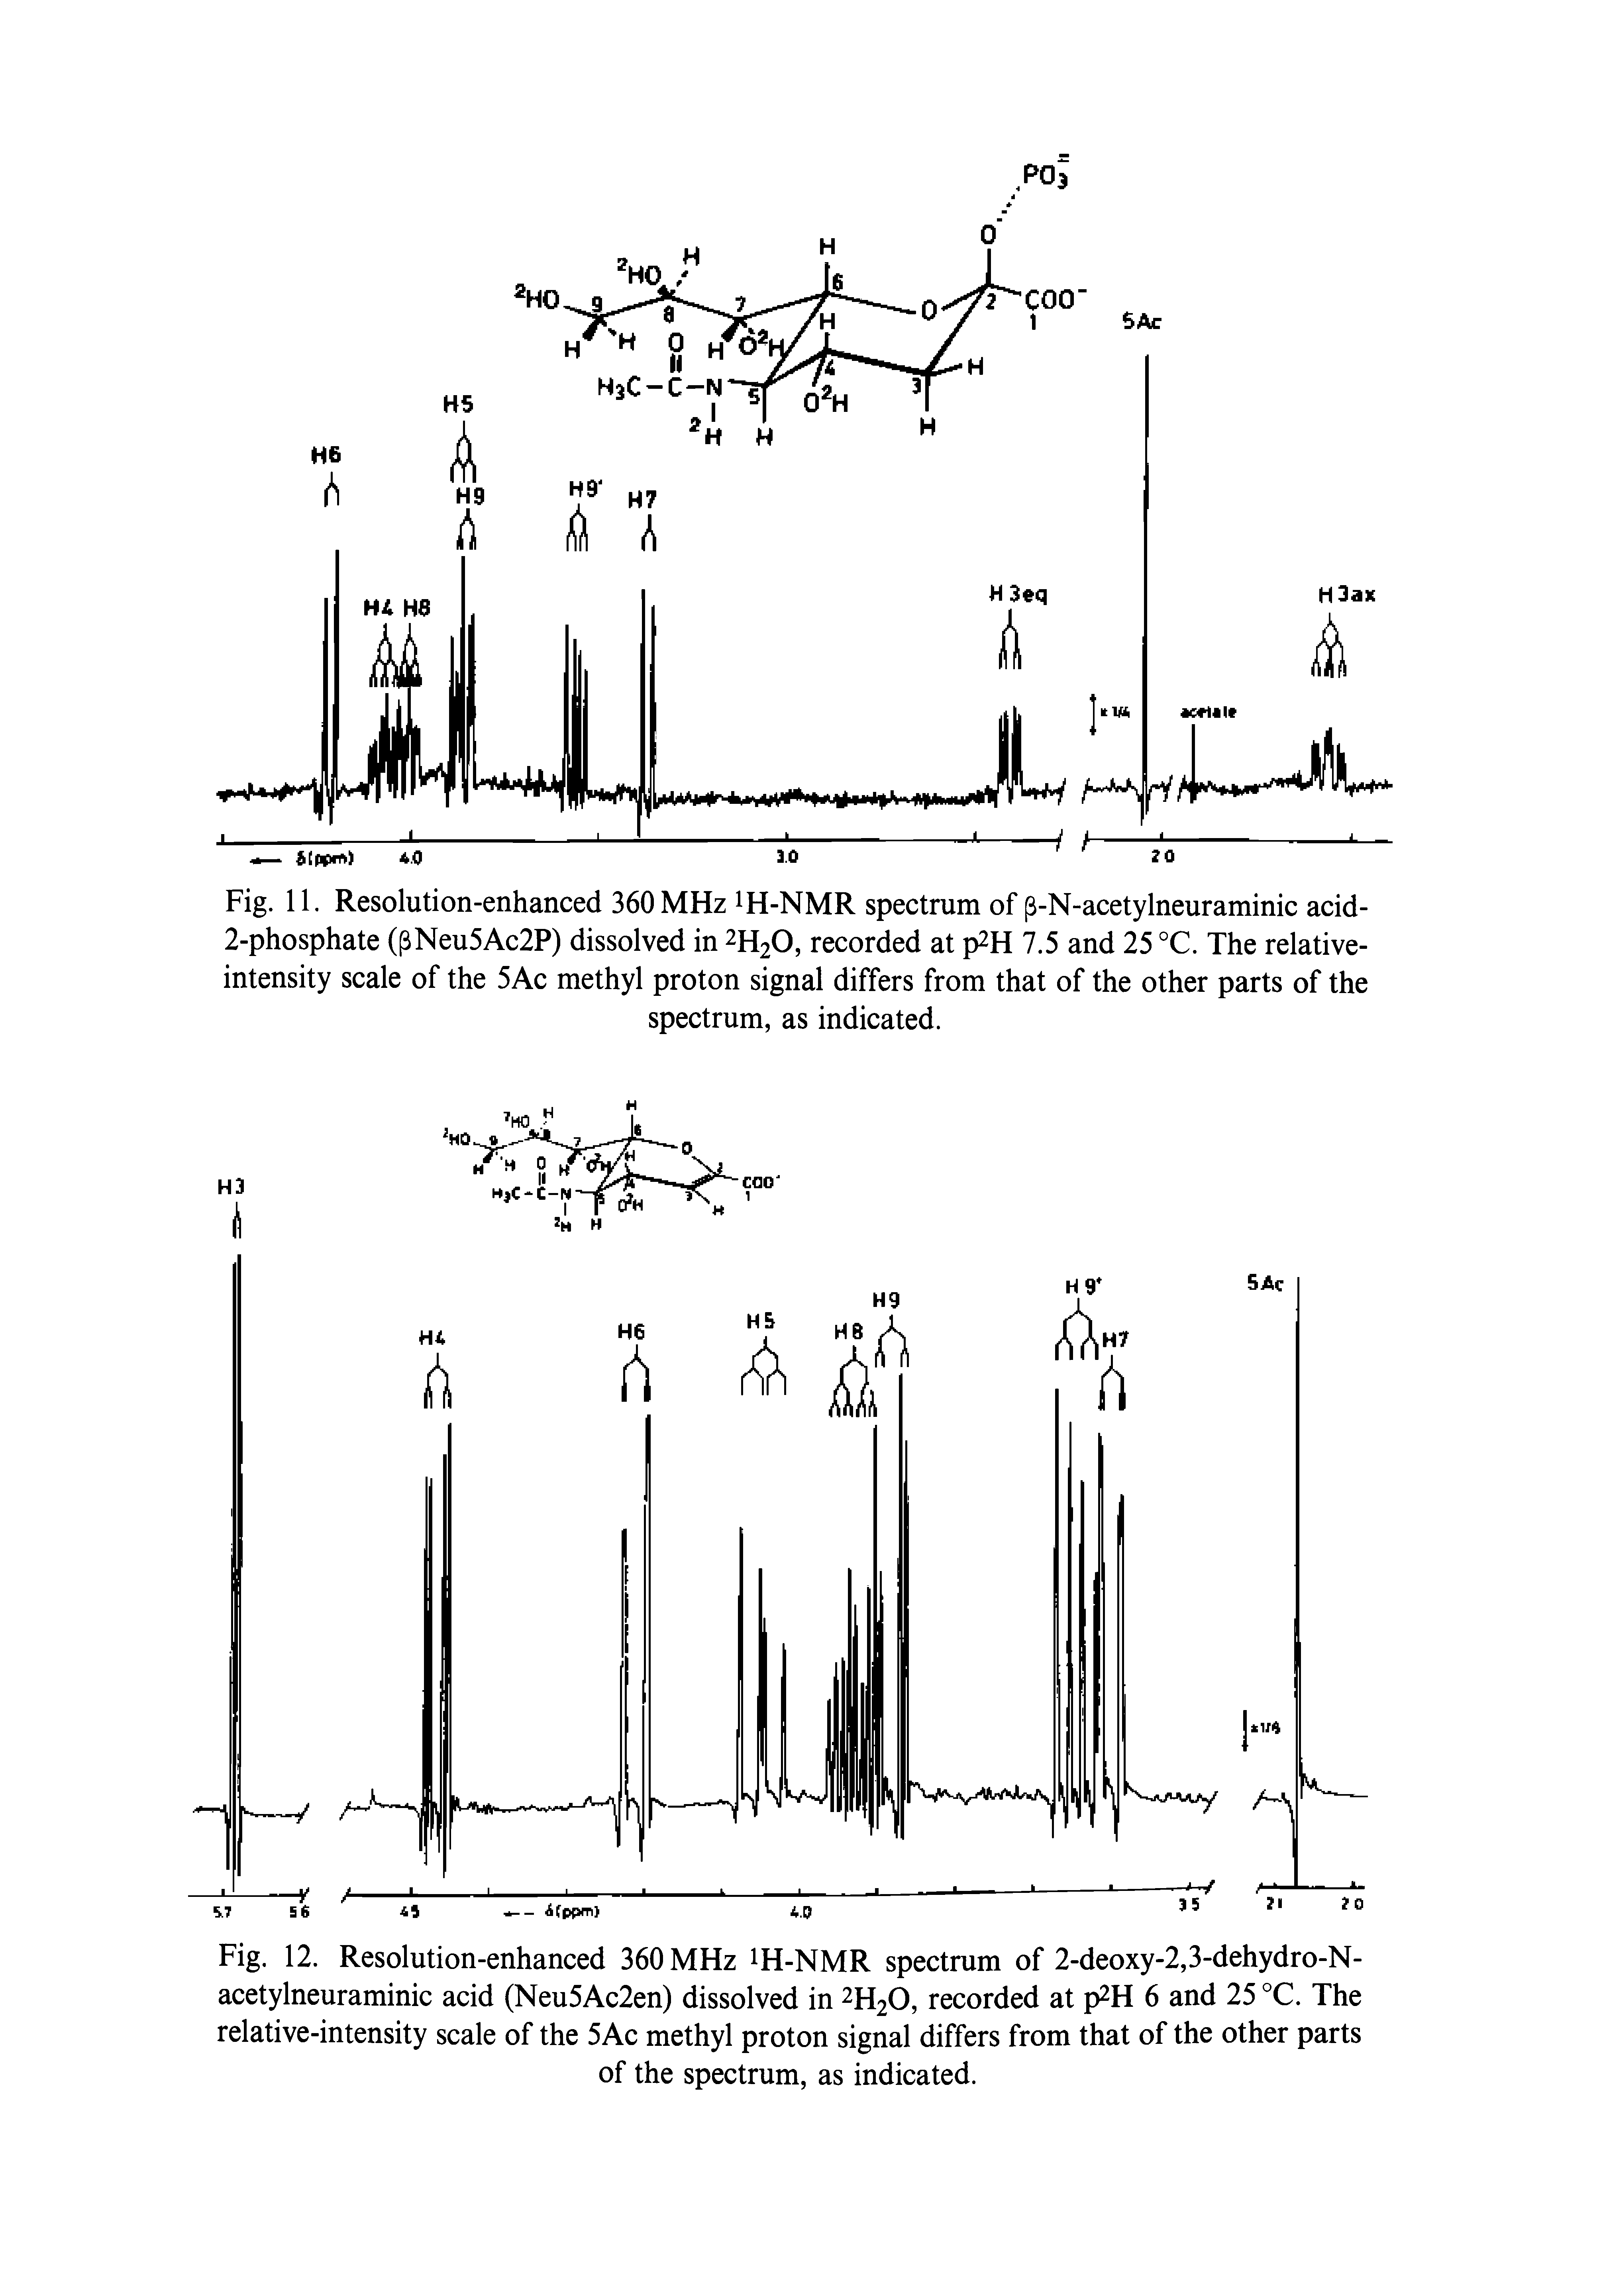 Fig. 11. Resolution-enhanced 360 MHz IH-NMR spectrum of p-N-acetylneuraminic acid-2-phosphate (pNeu5Ac2P) dissolved in 2H2O, recorded at p H 7.5 and 25 °C. The relative-intensity scale of the 5Ac methyl proton signal differs from that of the other parts of the...